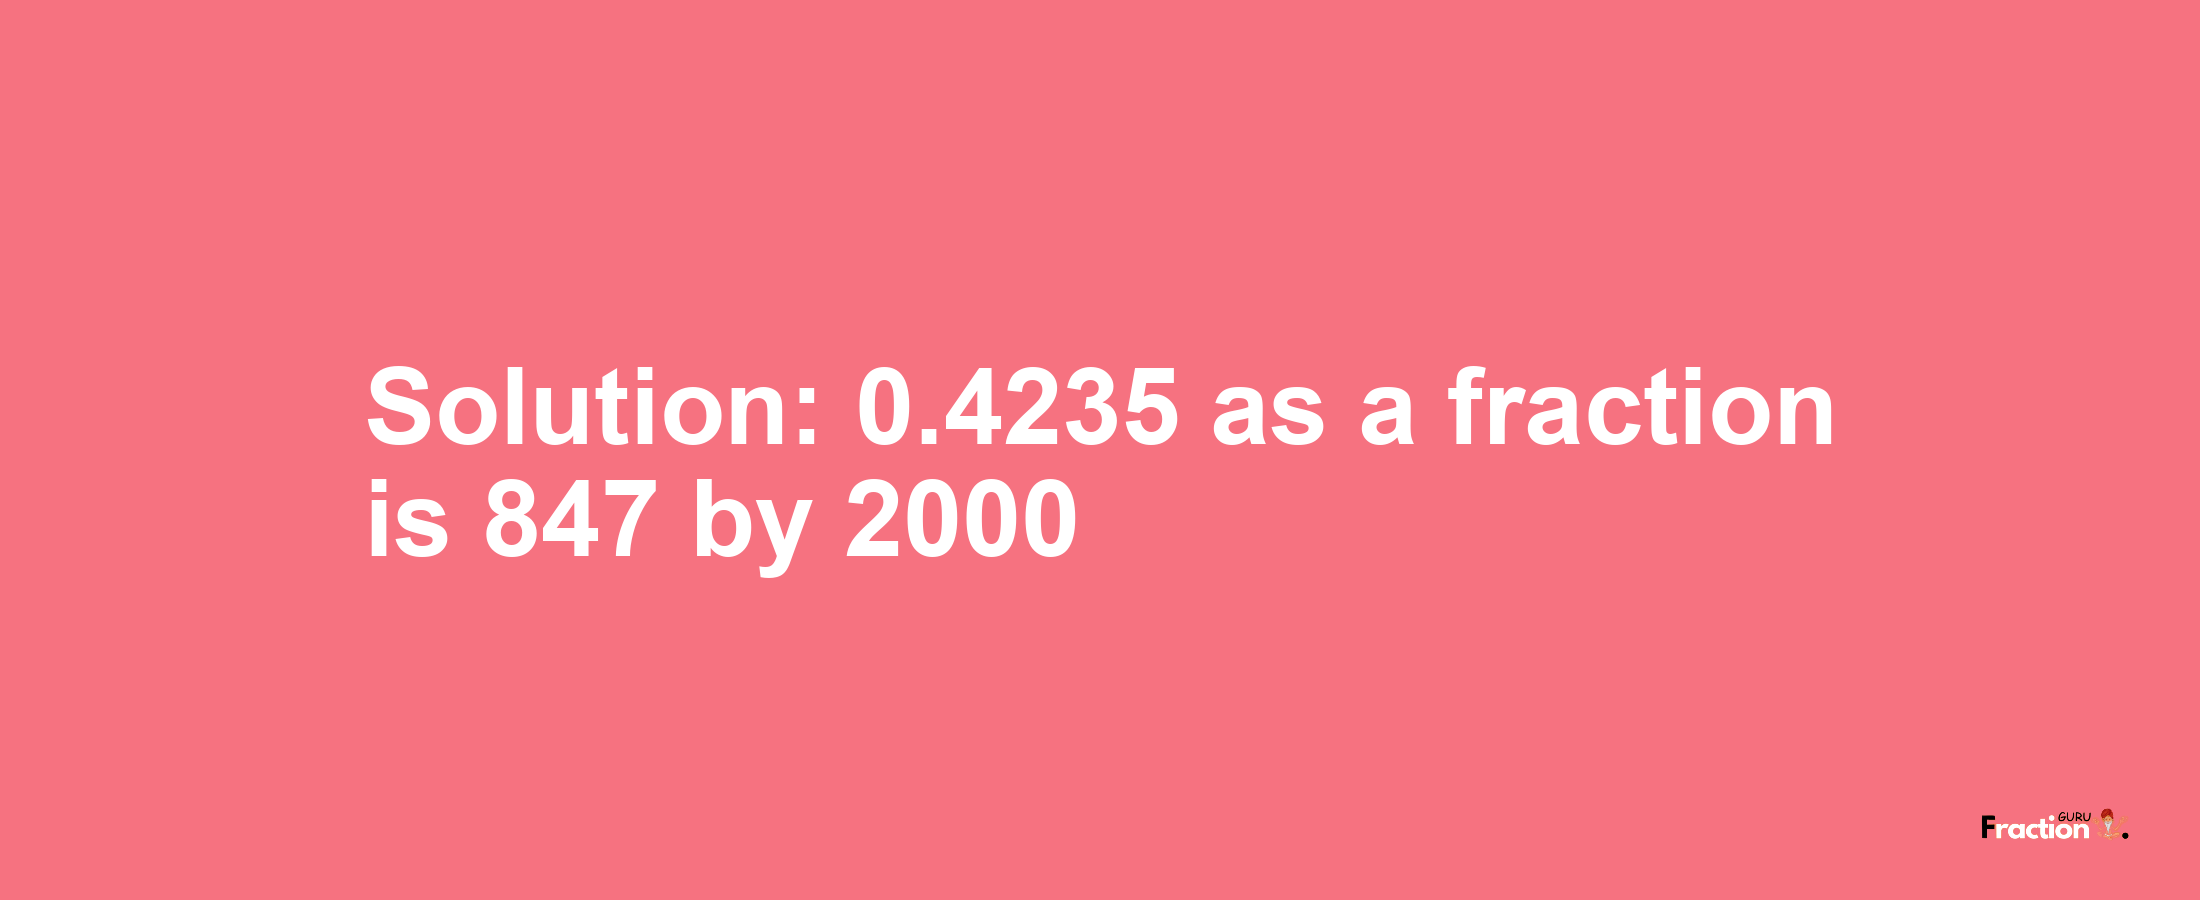 Solution:0.4235 as a fraction is 847/2000